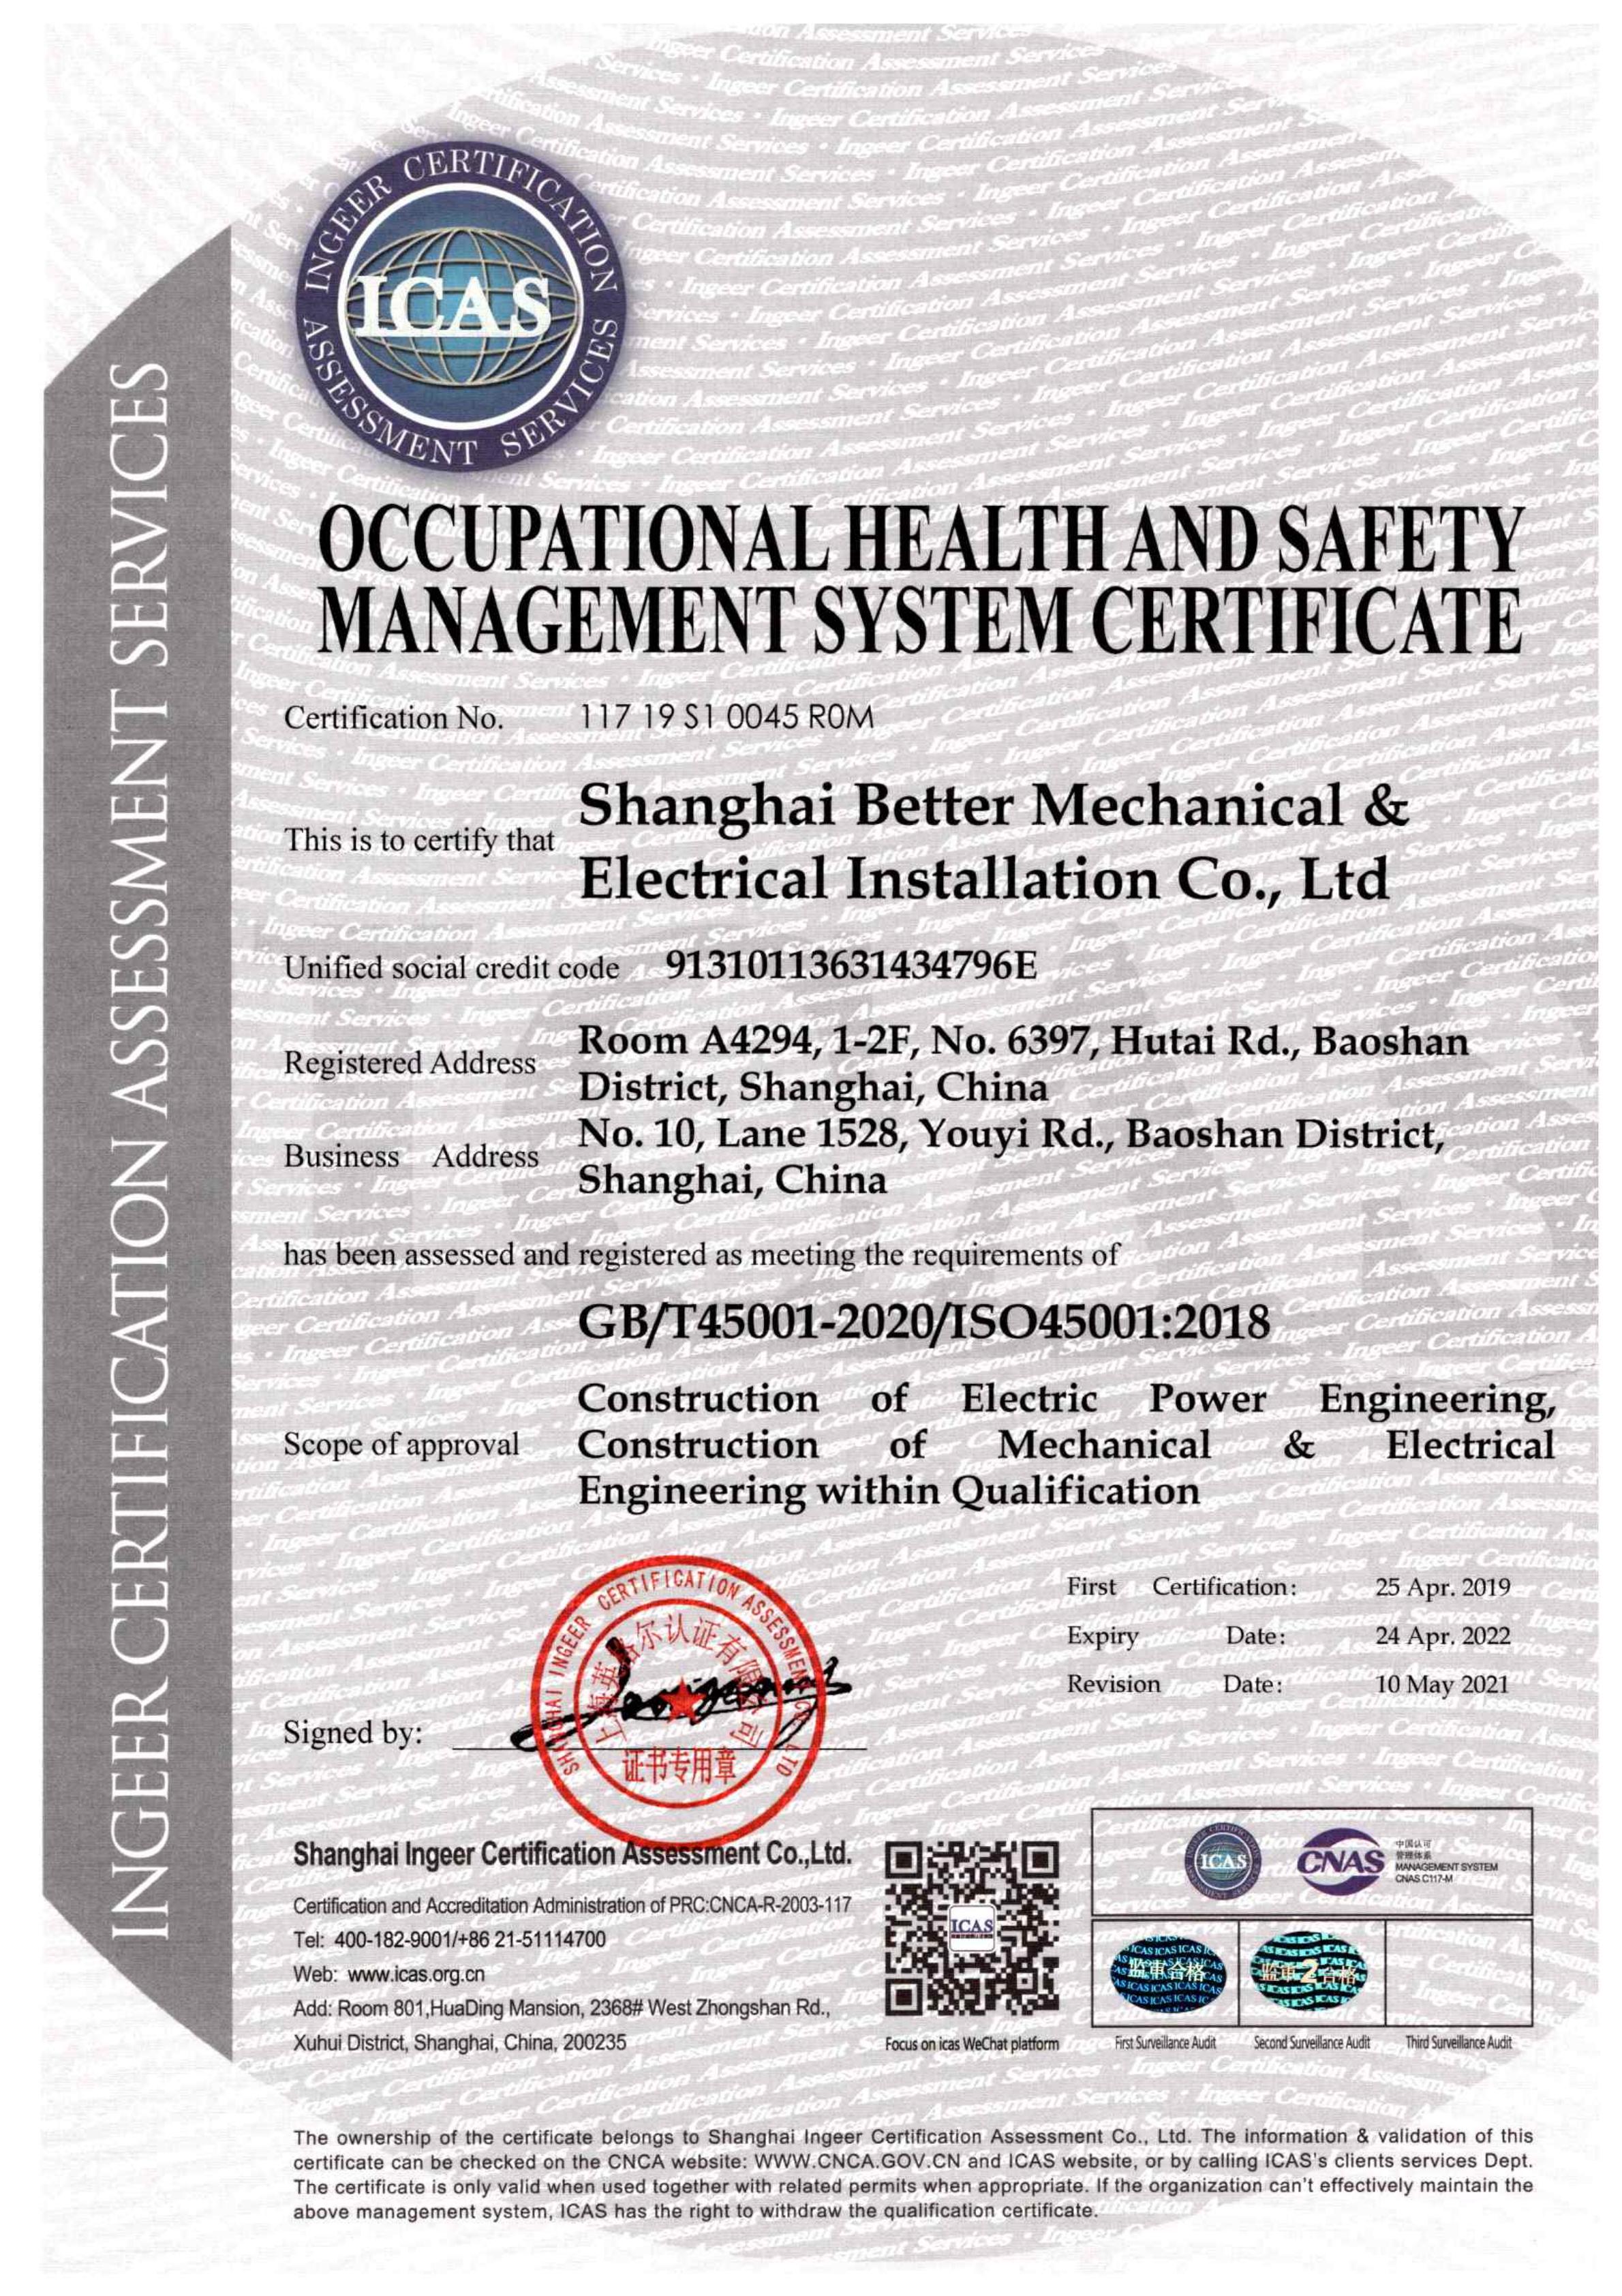 Management System Certificate - Occupational Health and Safety